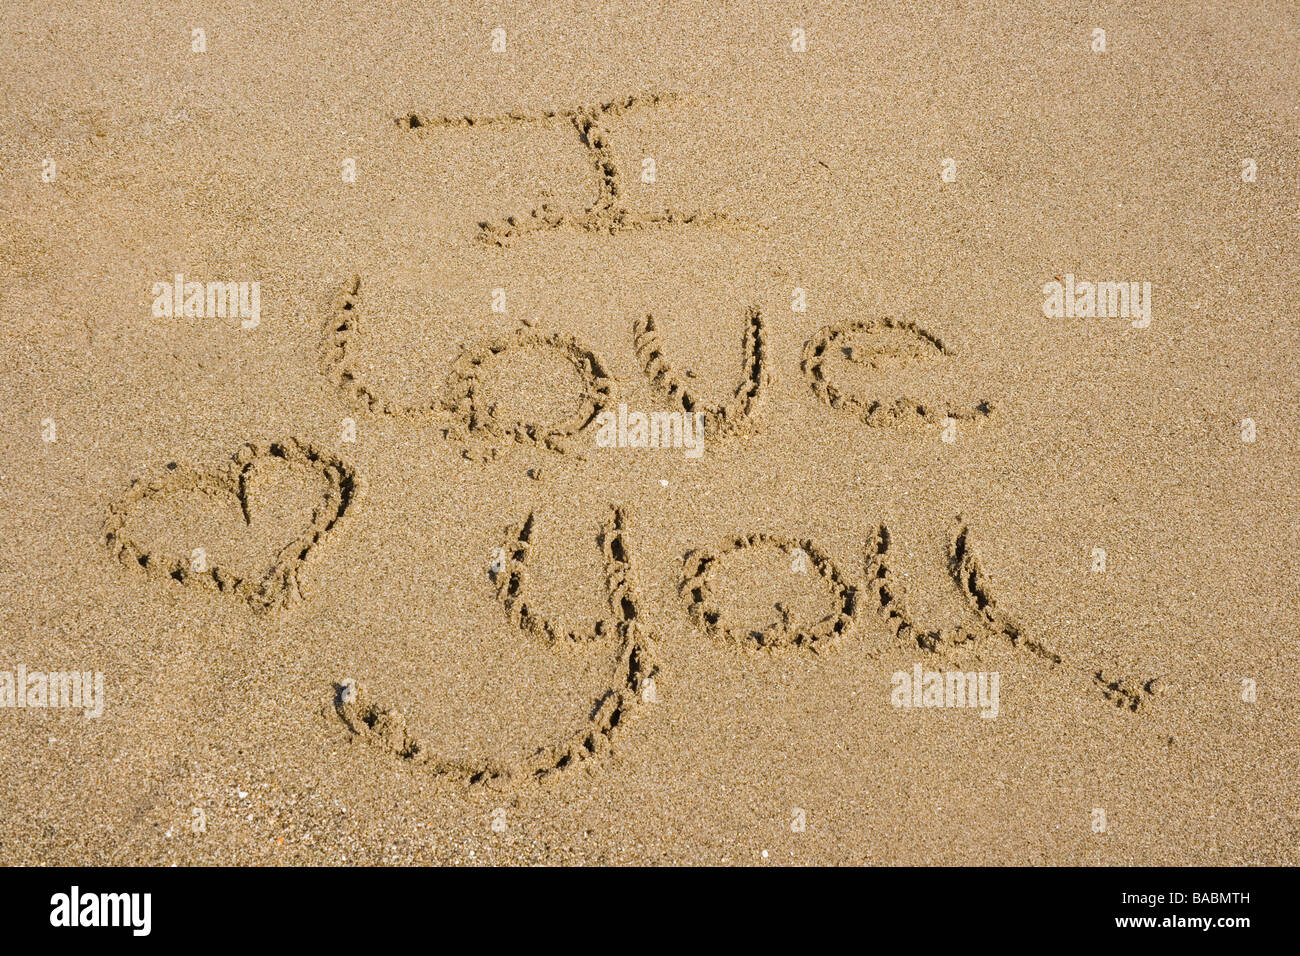 I Love You written in the sand Stock Photo